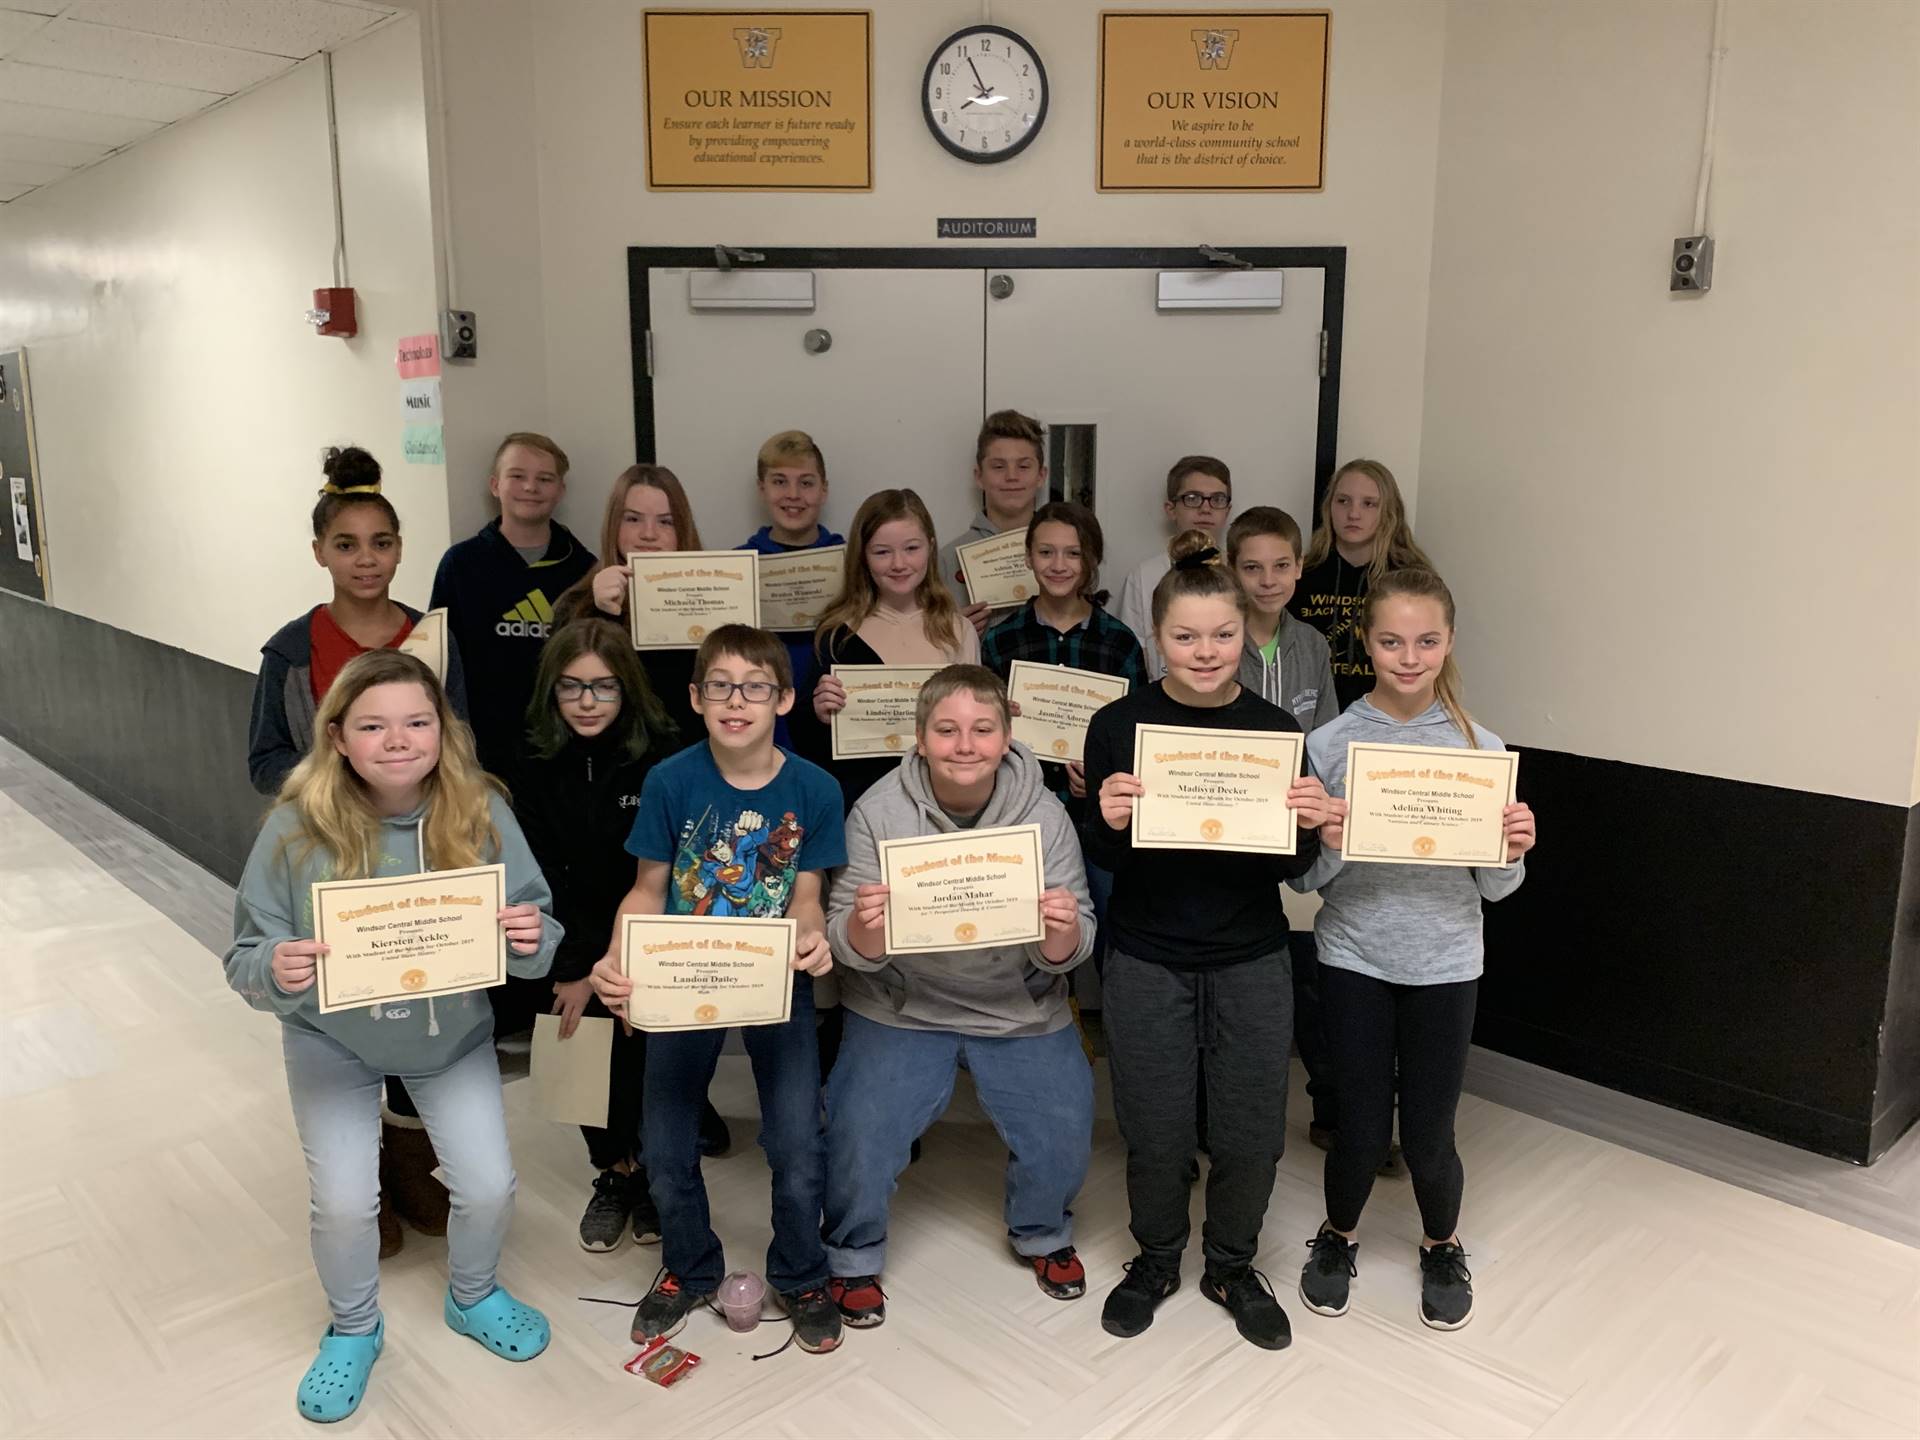 16 students holding certificates in a hallway